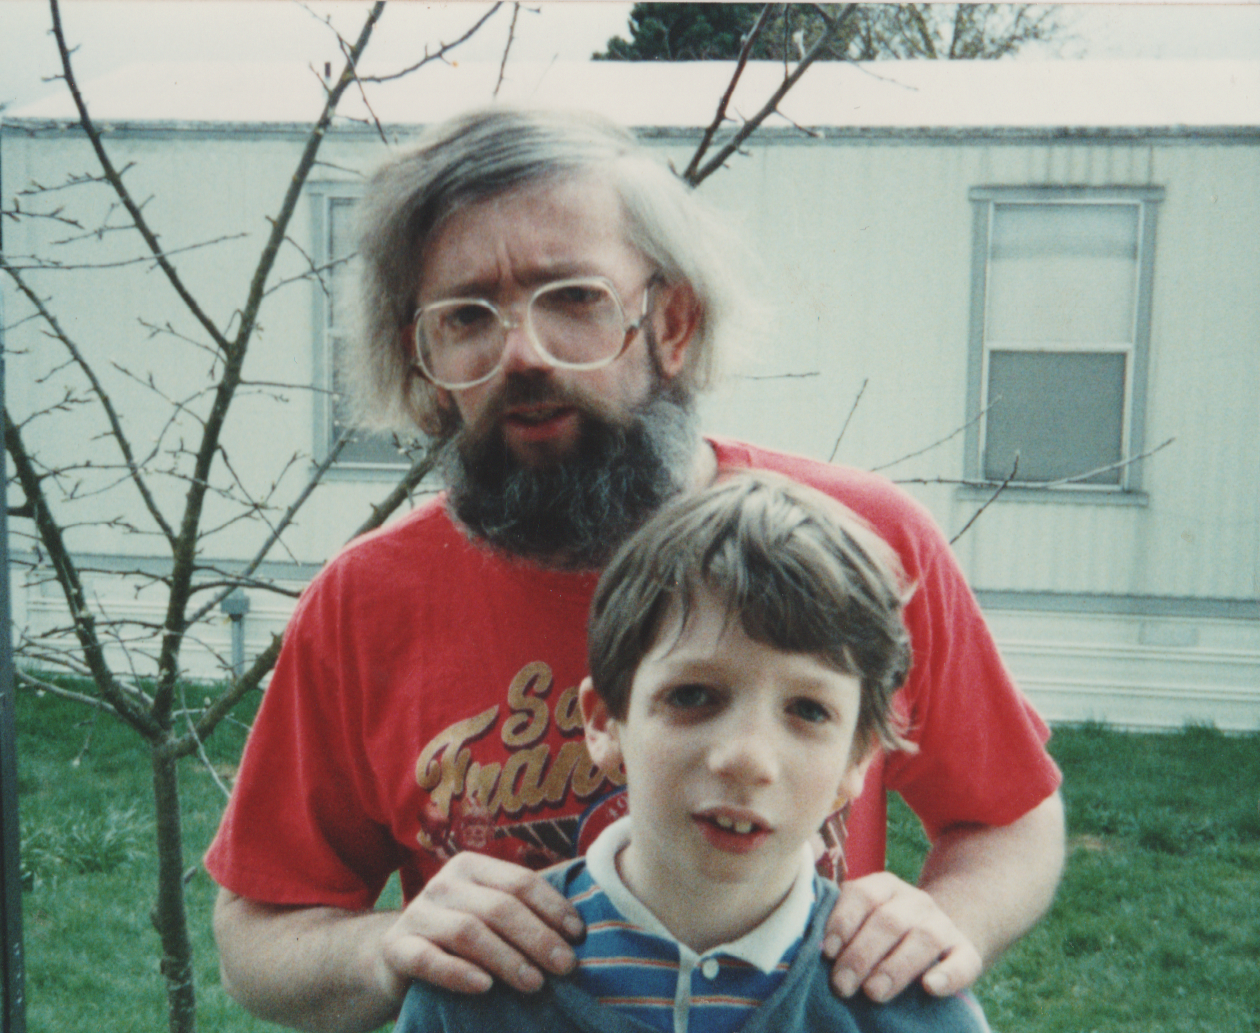 1990s - 163-backyard - Don, Rick - Not sure which year.png